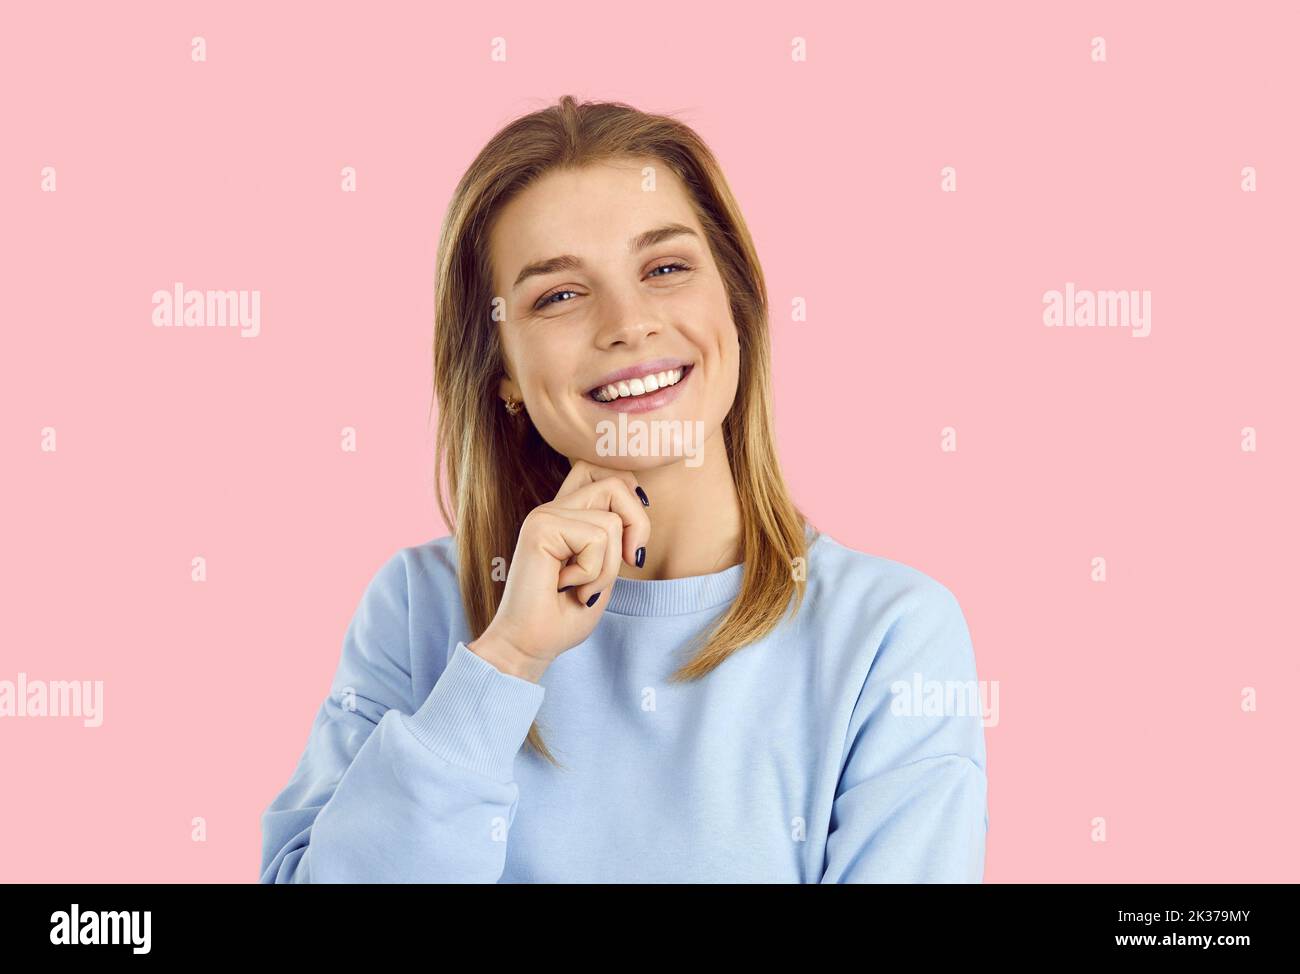 Portrait of smiling girl on pink background laughing Stock Photo